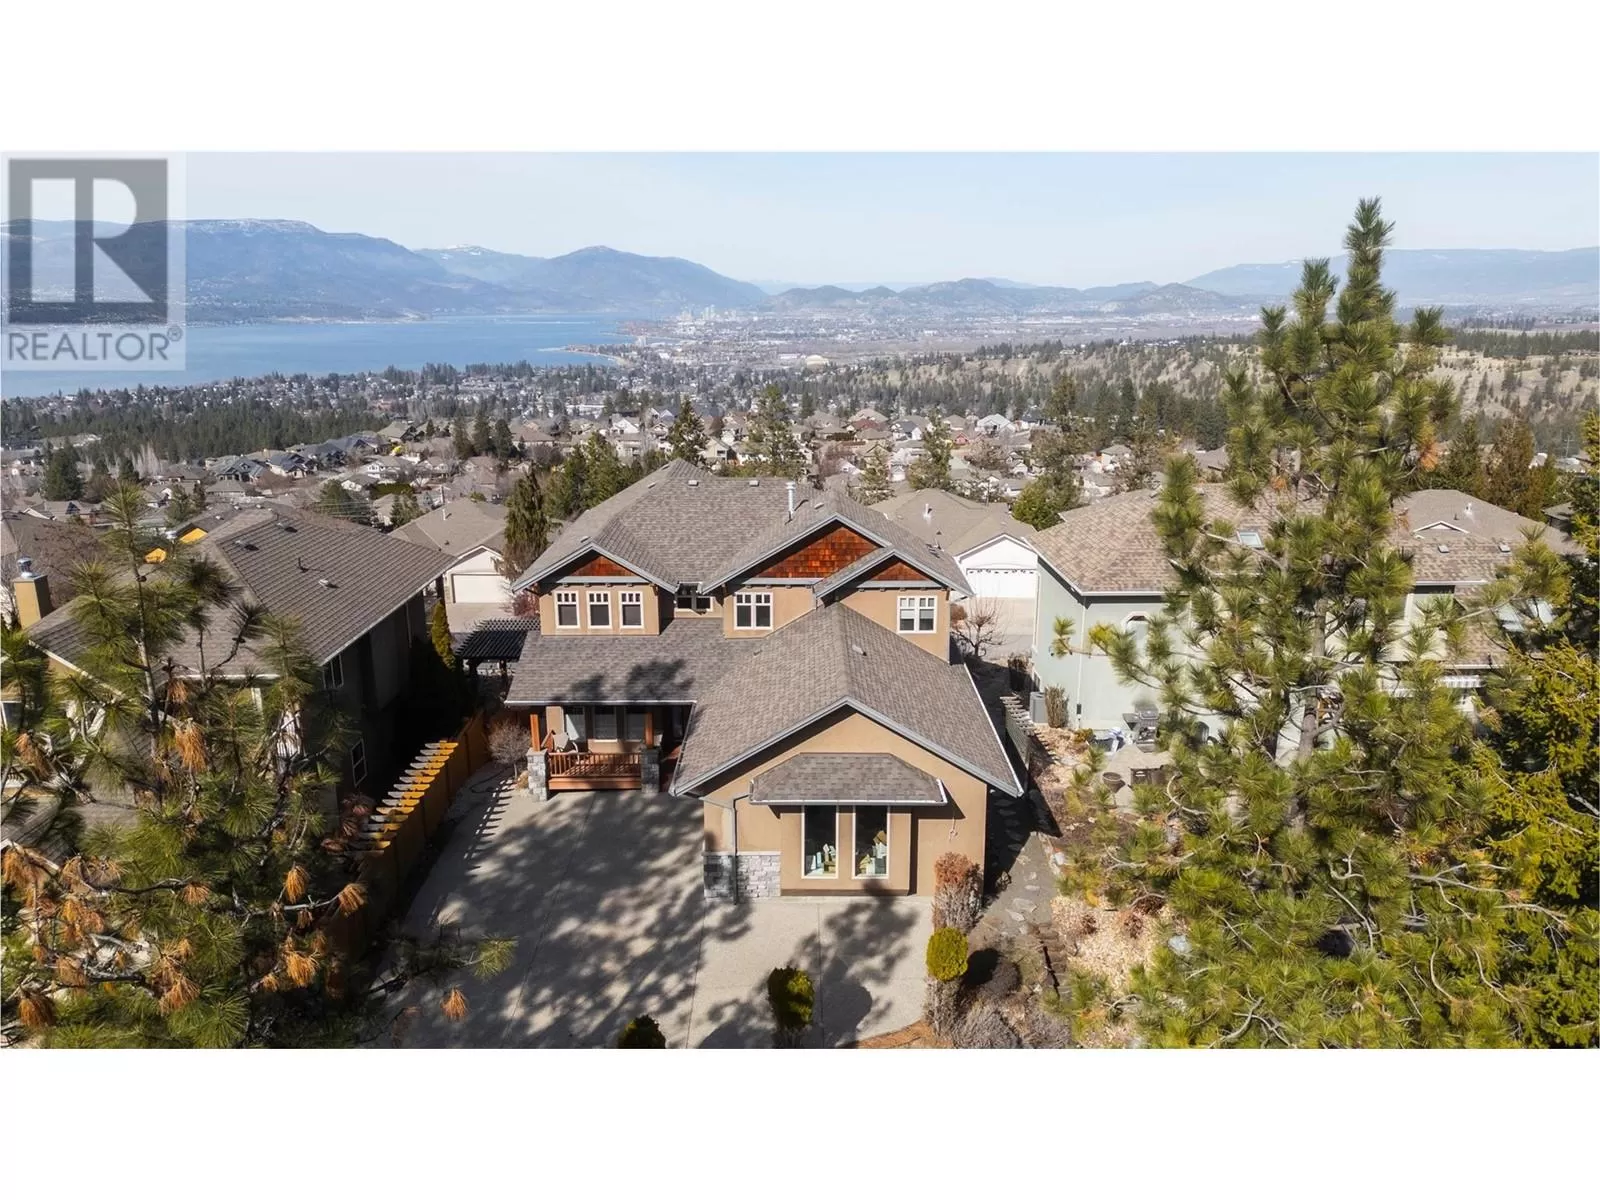 House for rent: 755 South Crest Drive, Kelowna, British Columbia V1W 4W7